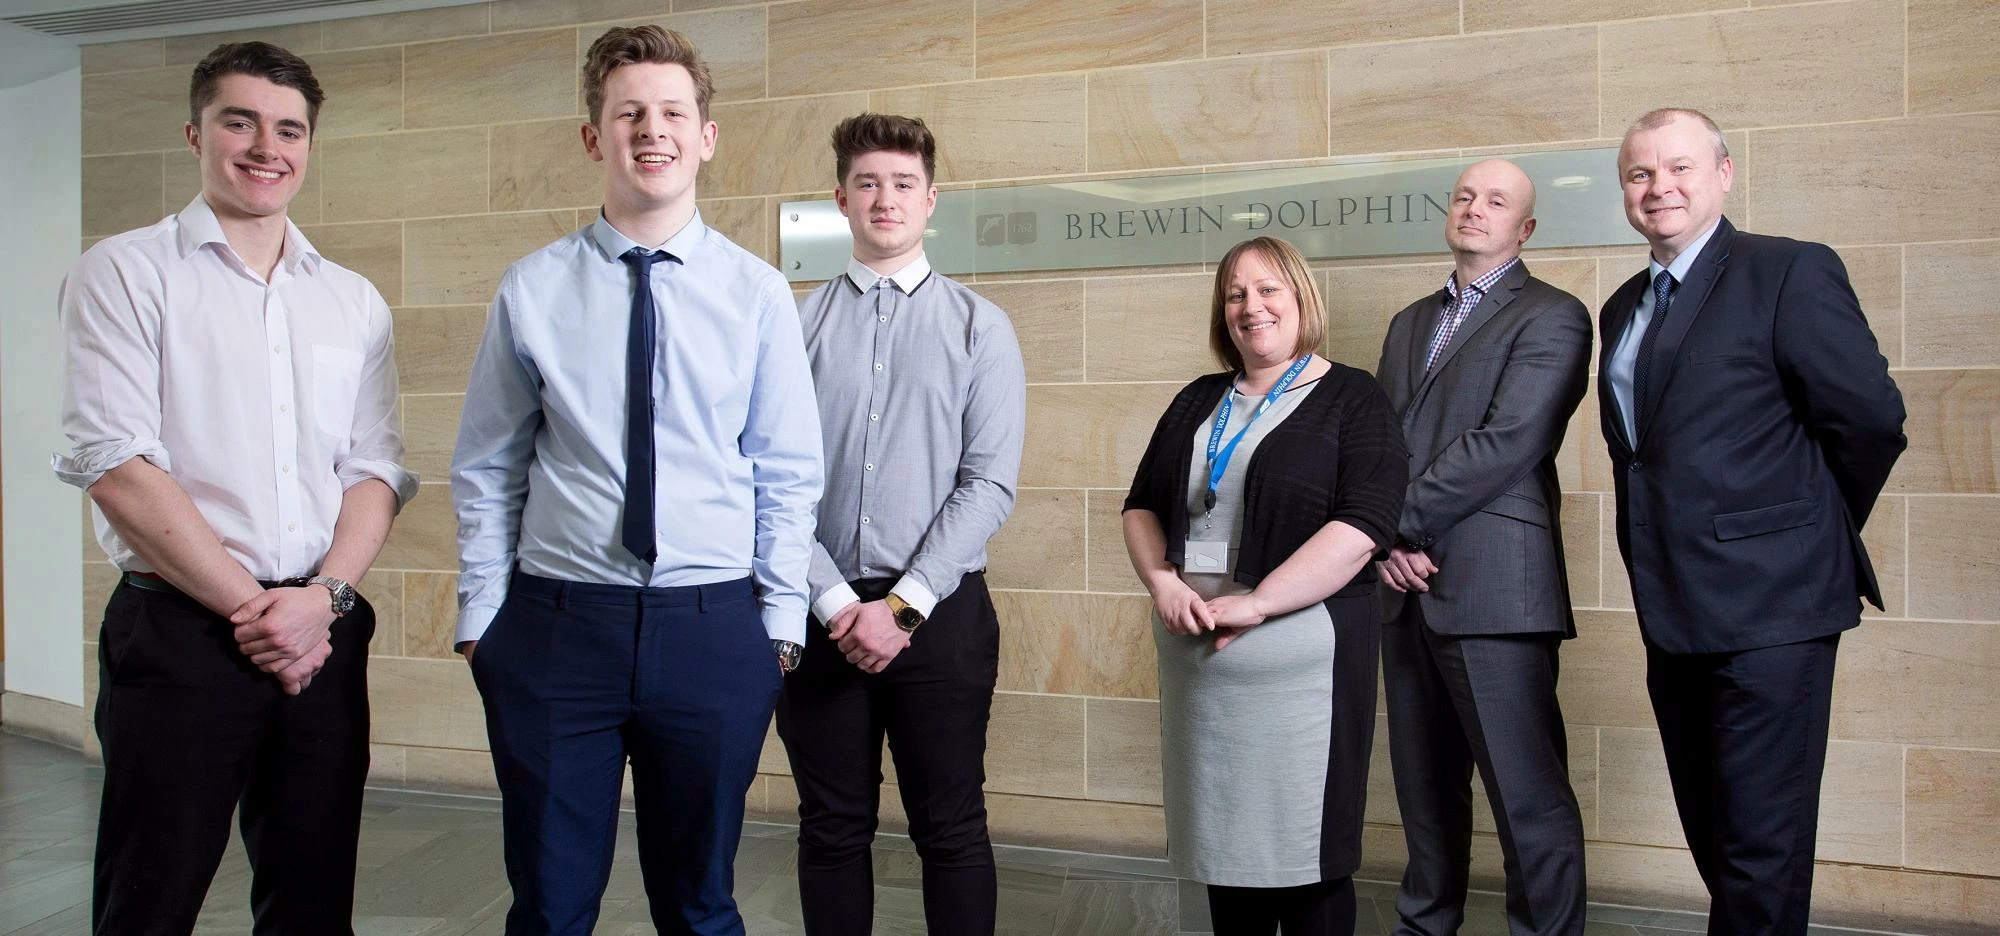 Left to right: apprentices Jerome Hardy, James Capstick, and Matthew Tulip; Claire Martin and John O